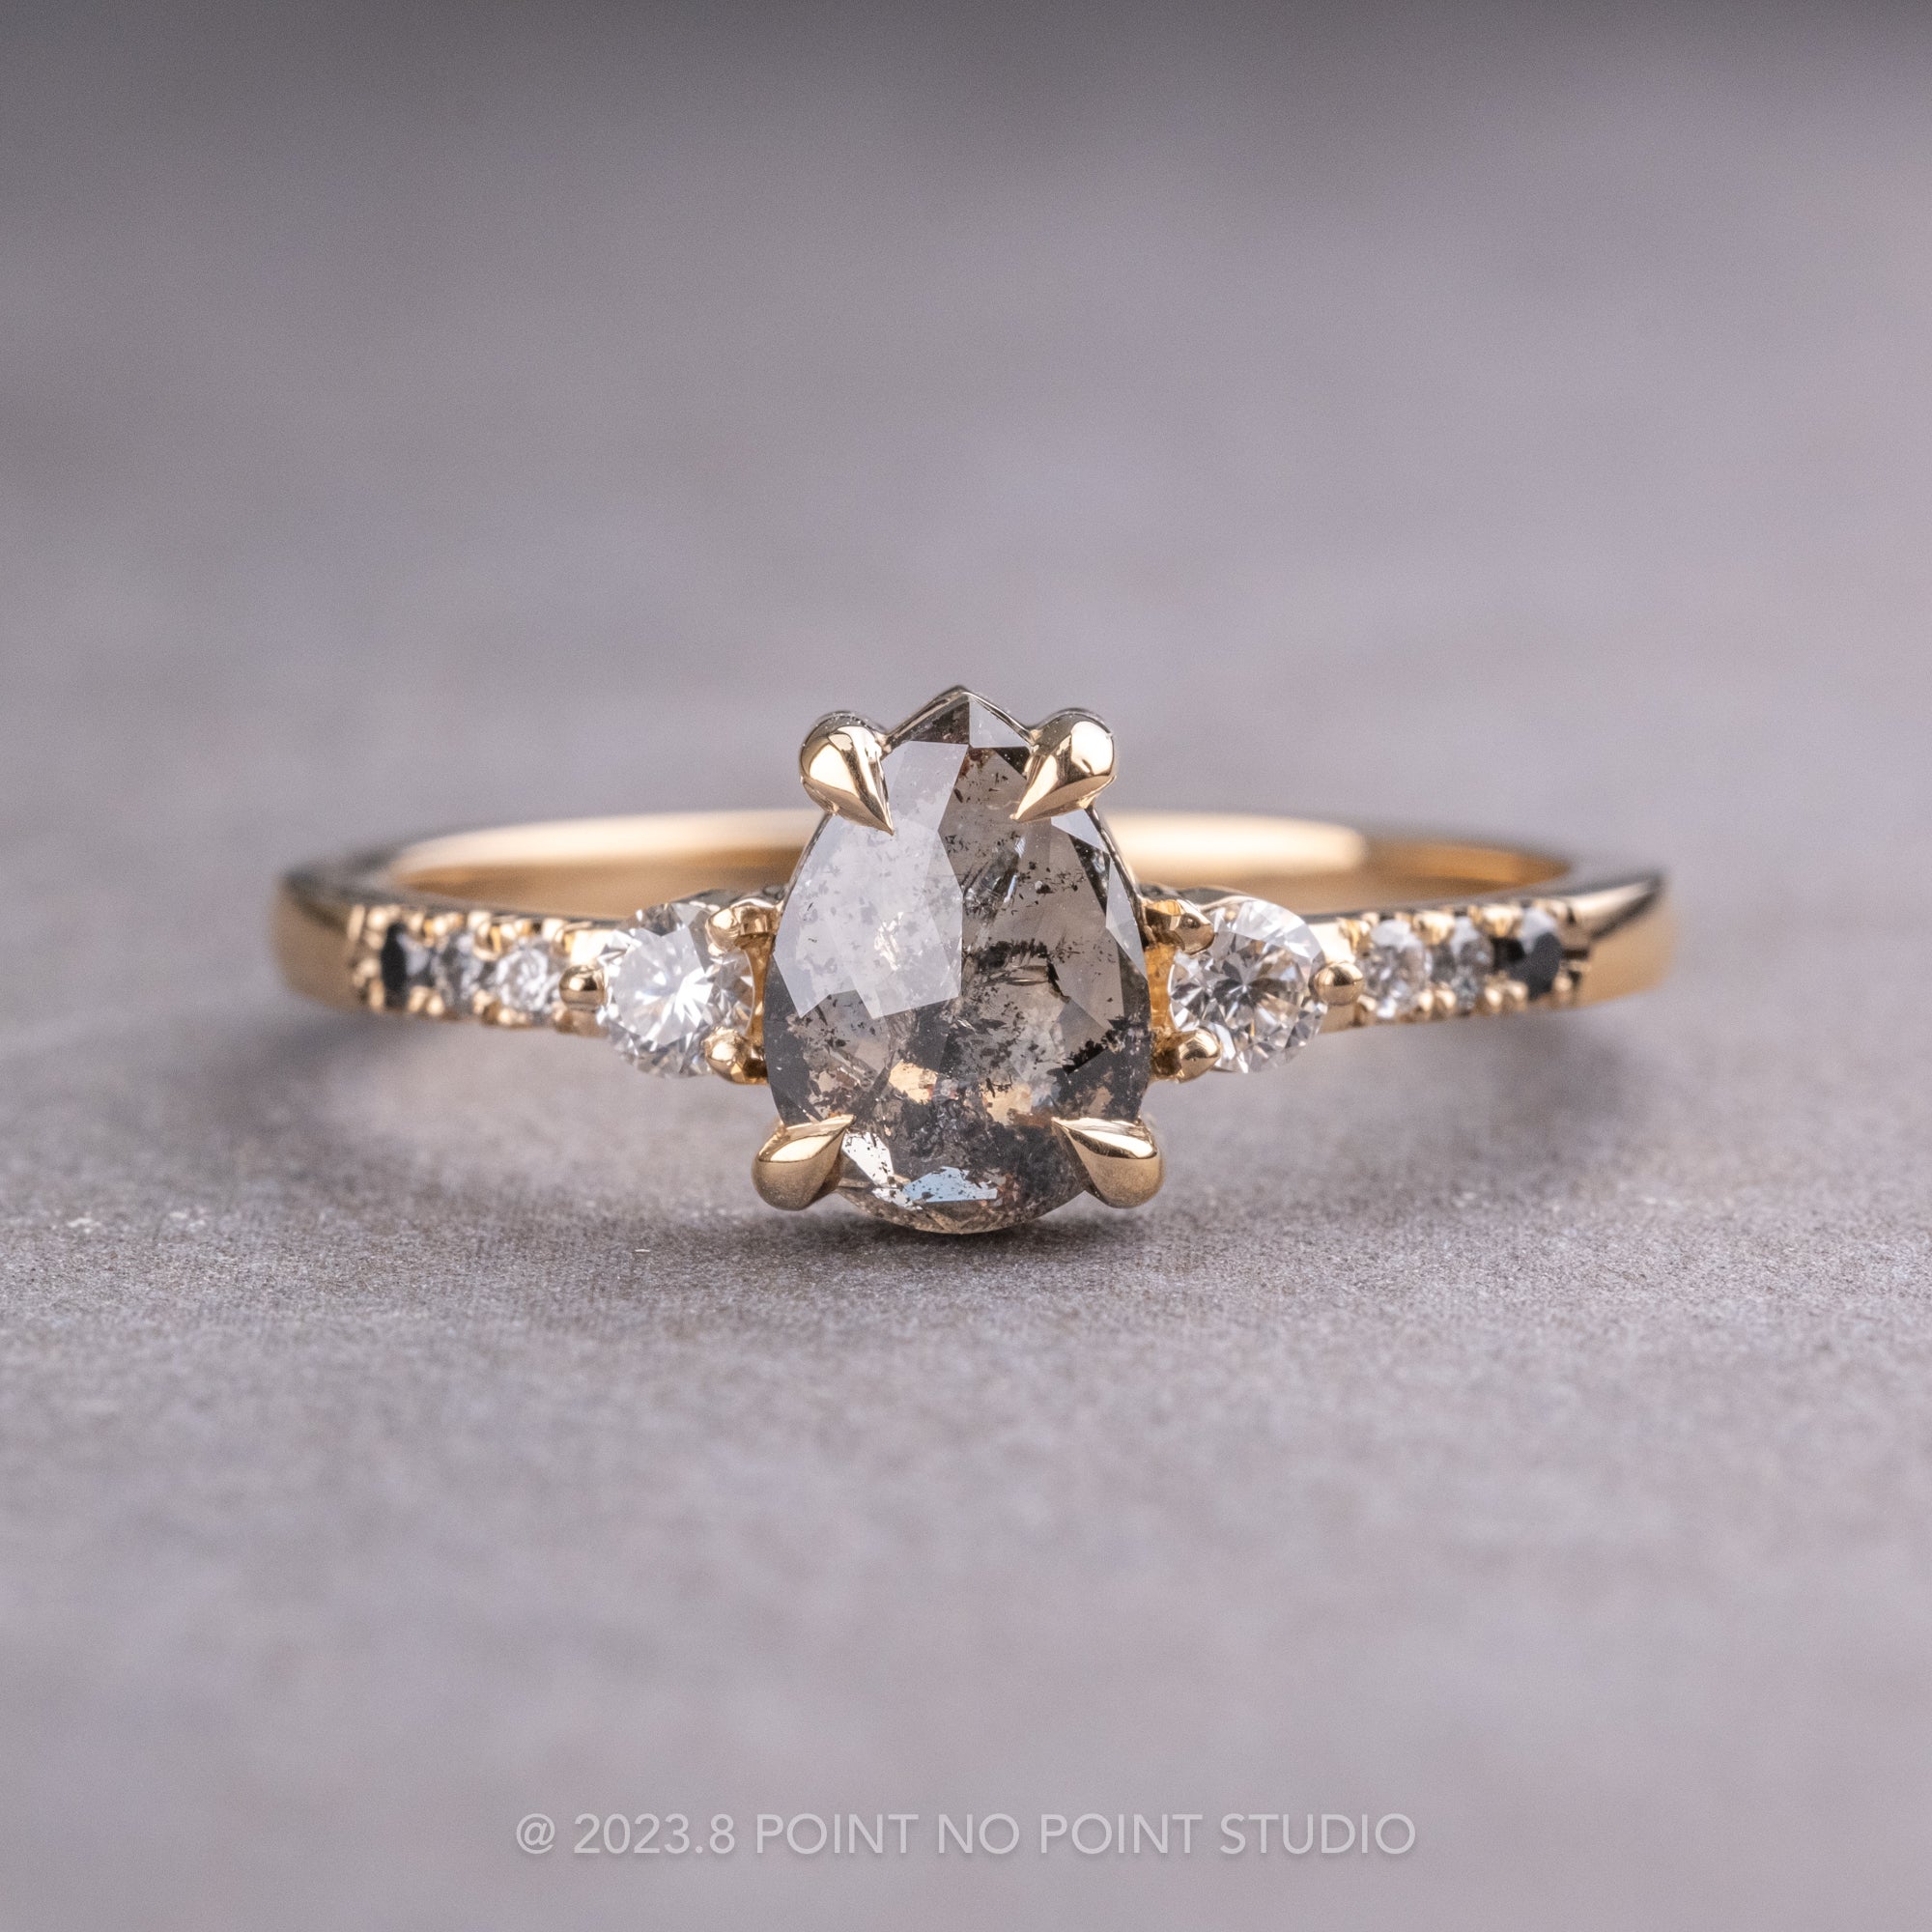 Salt and Pepper Diamond Engagement Ring, Point No Point Studio 3